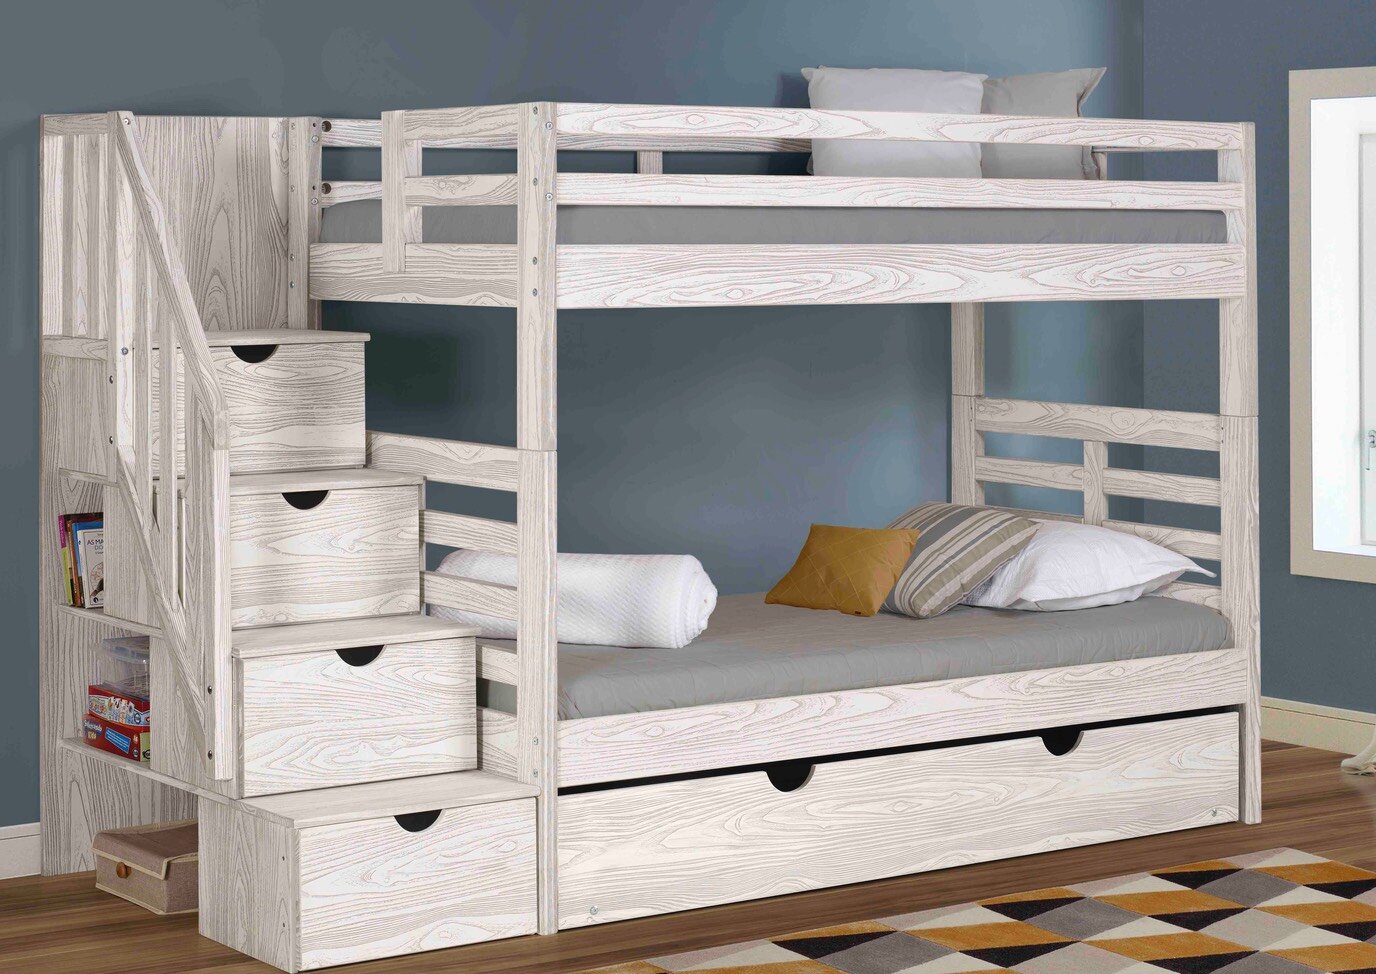 Solid Wood Bunk Bed With Staircase, Birch Wood Bunk Beds